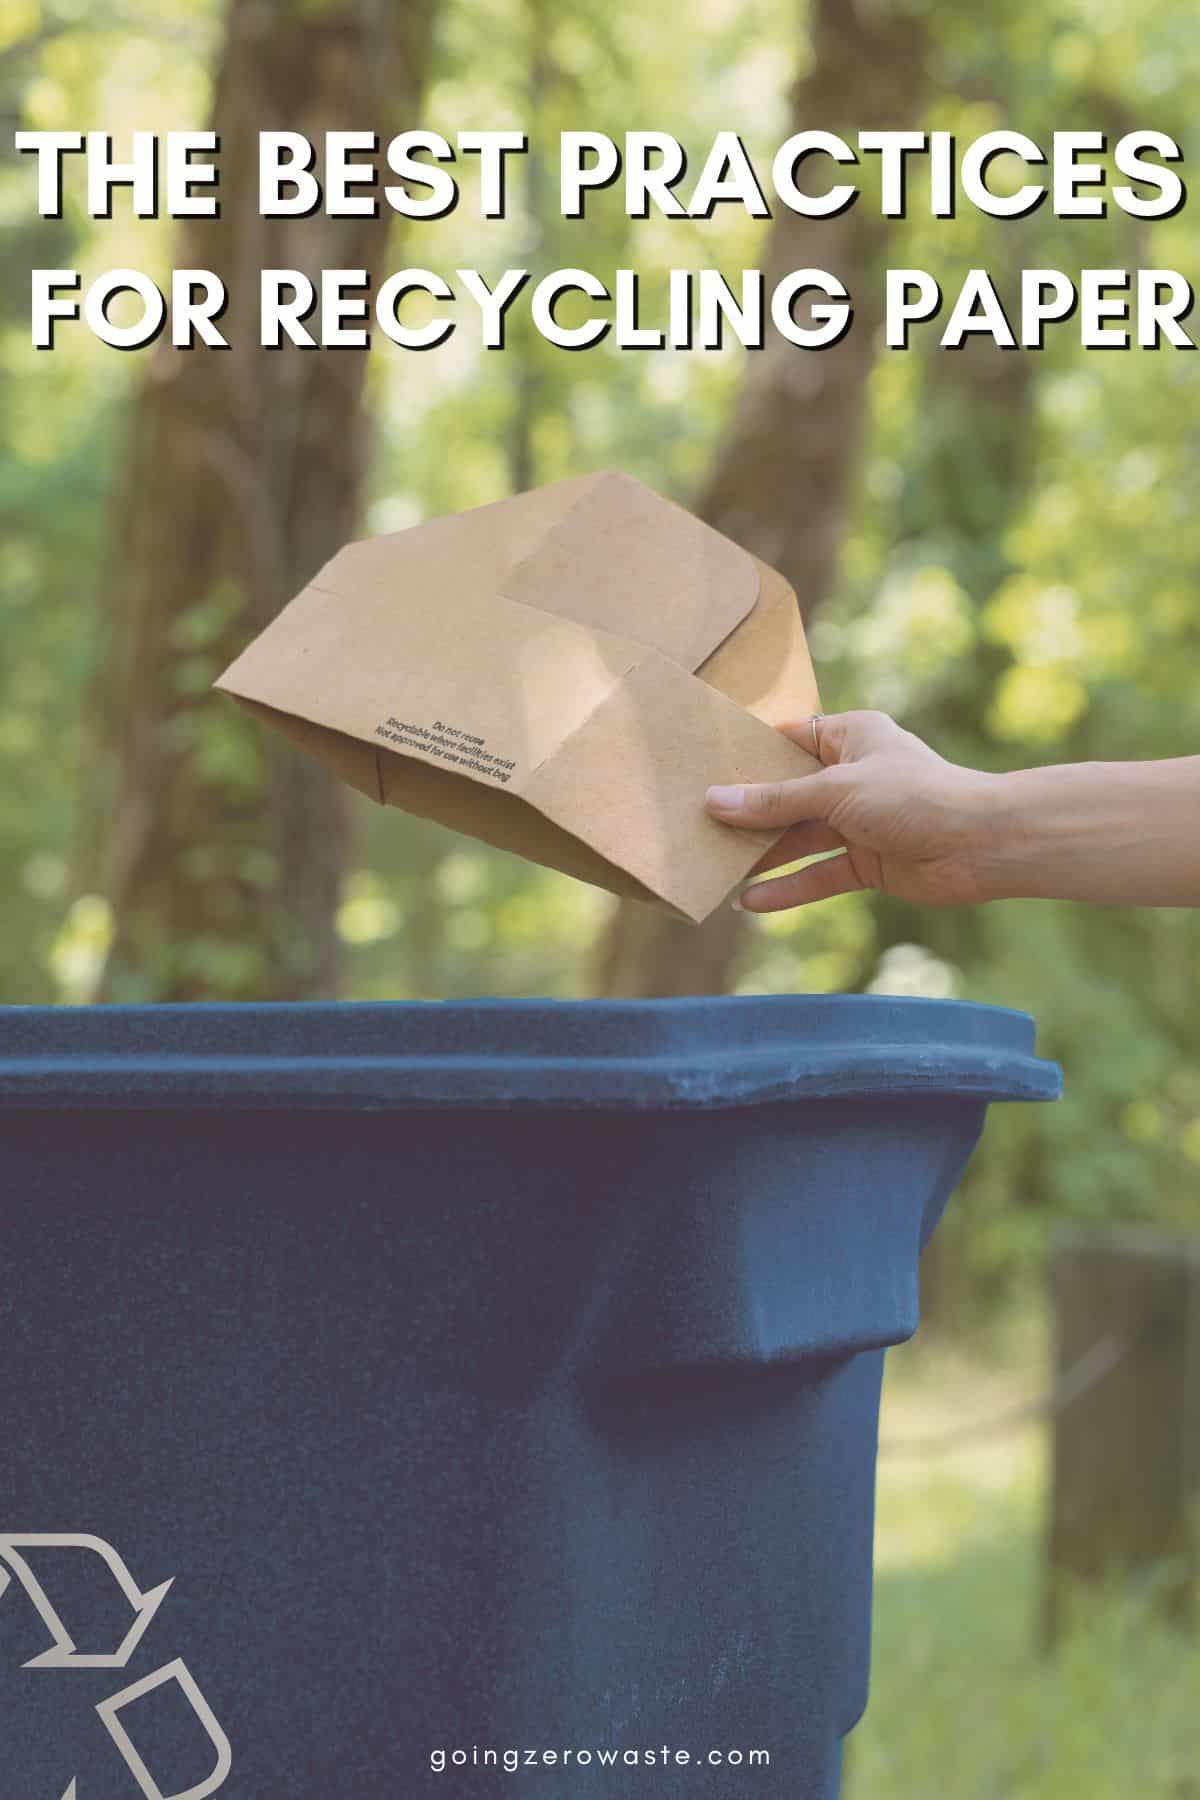 10 Tips for Recycling Paper